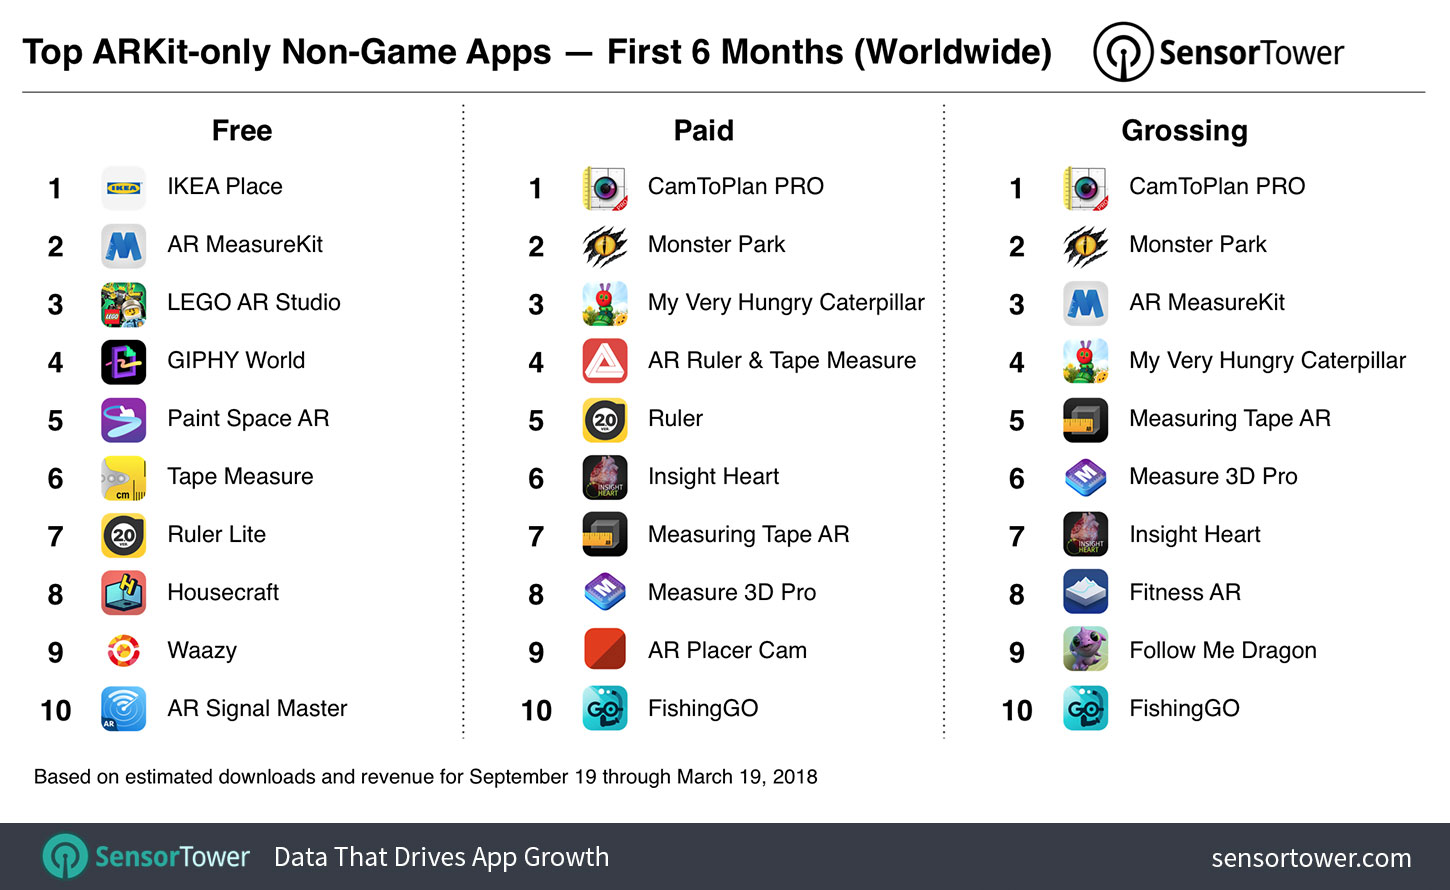 top grossing game 2018